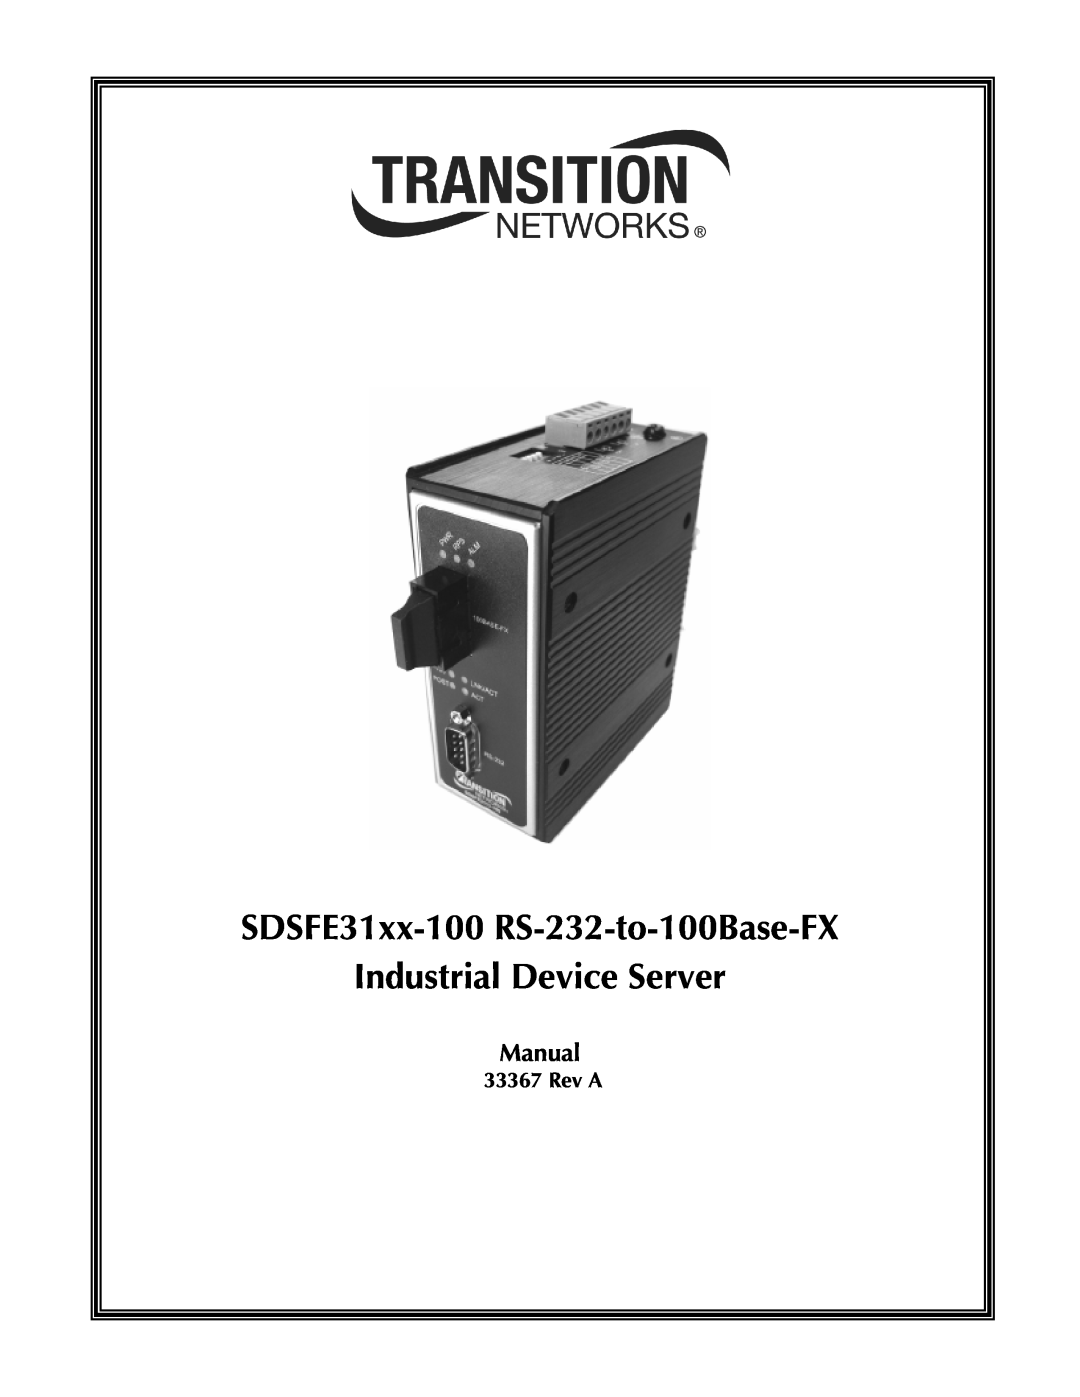 Transition Networks SDSFE31XX-100, RS-232-TO-100BASE-FX manual 